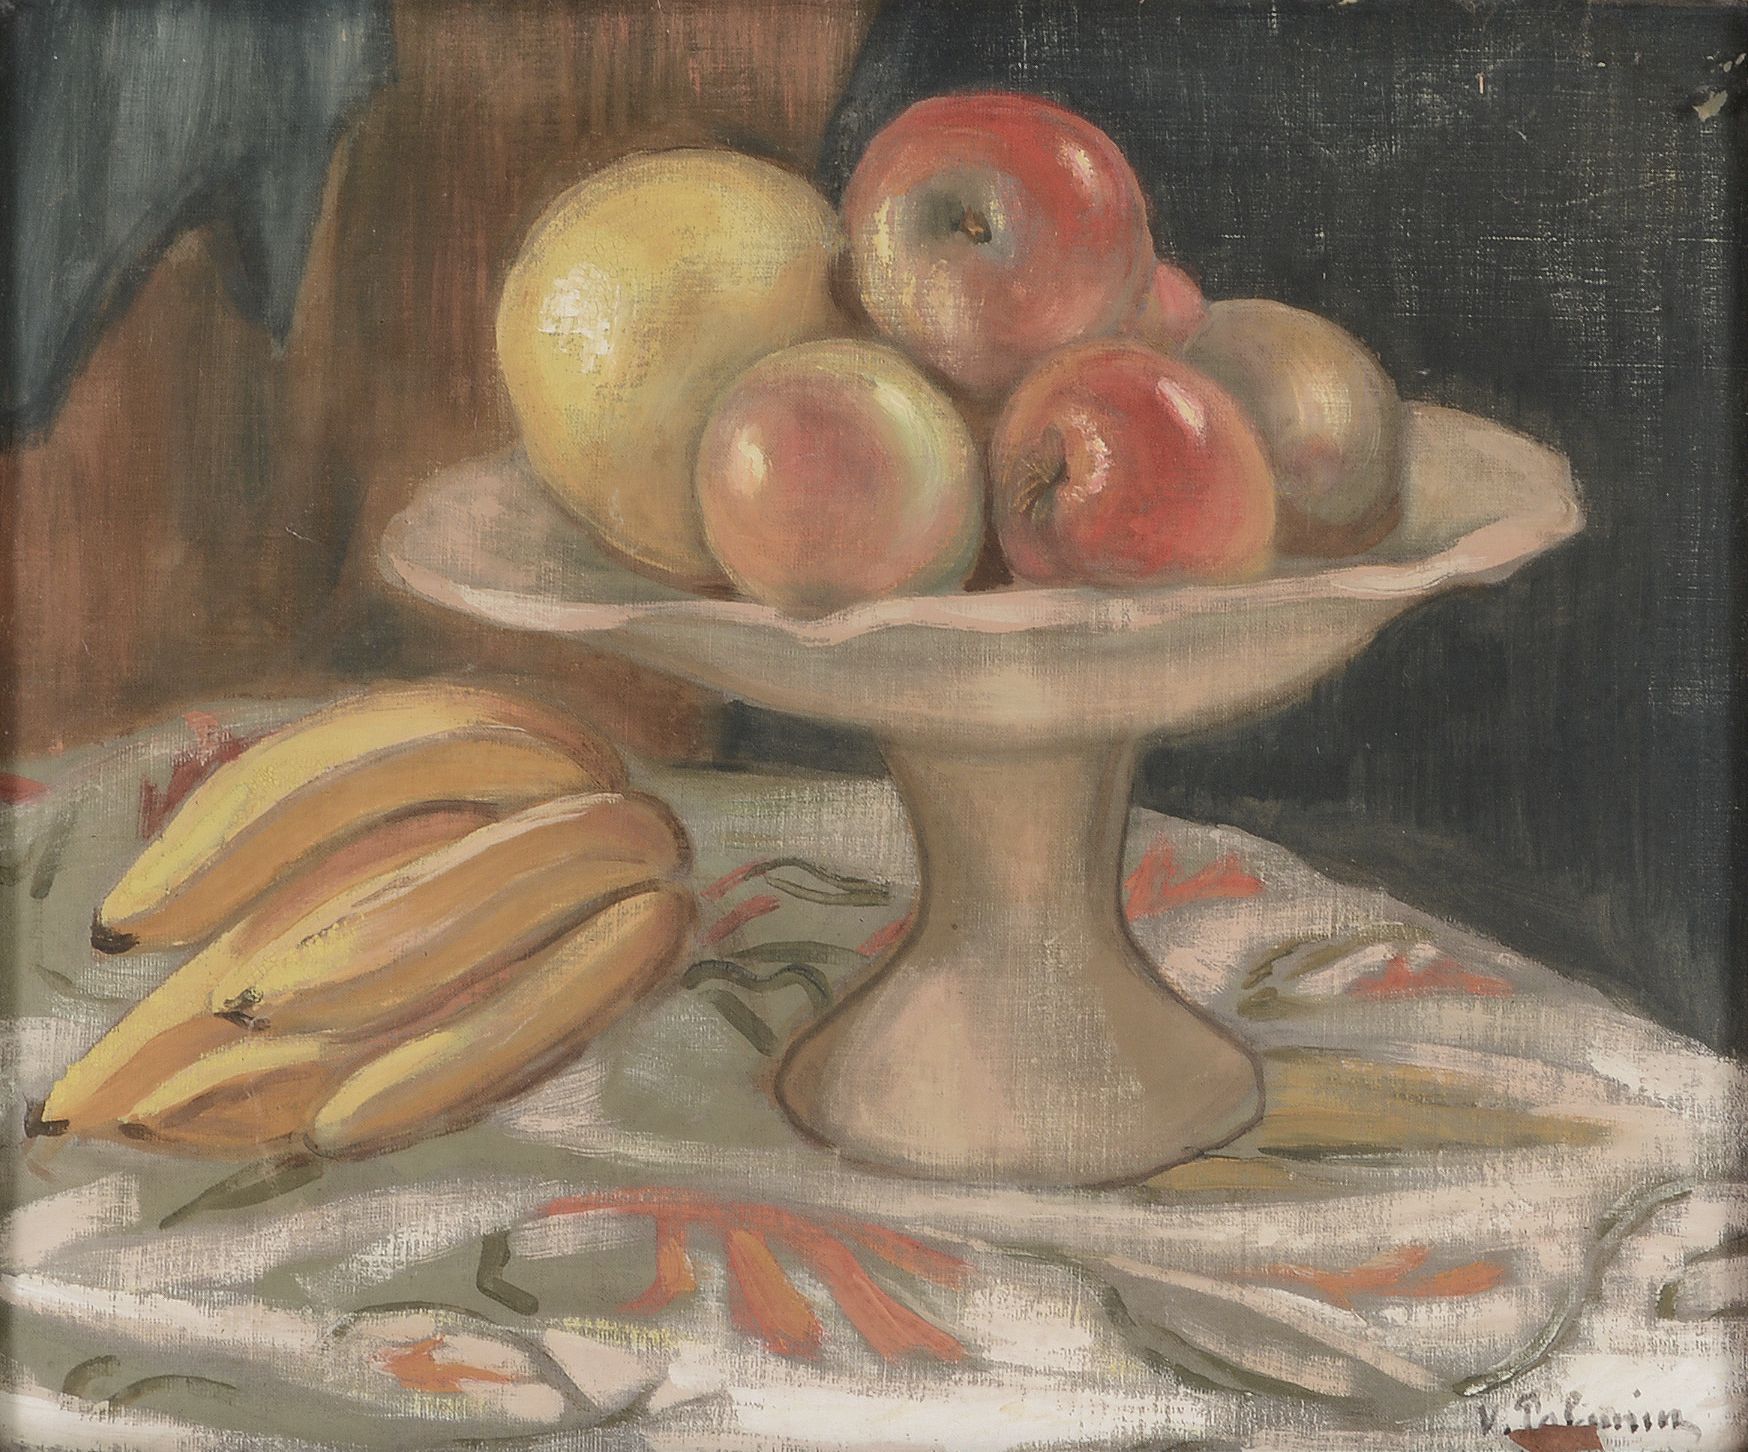 Vladimir Polunin (b.1880-?) - Still life with apples and a grapefruit in a bowl, with bananas on a